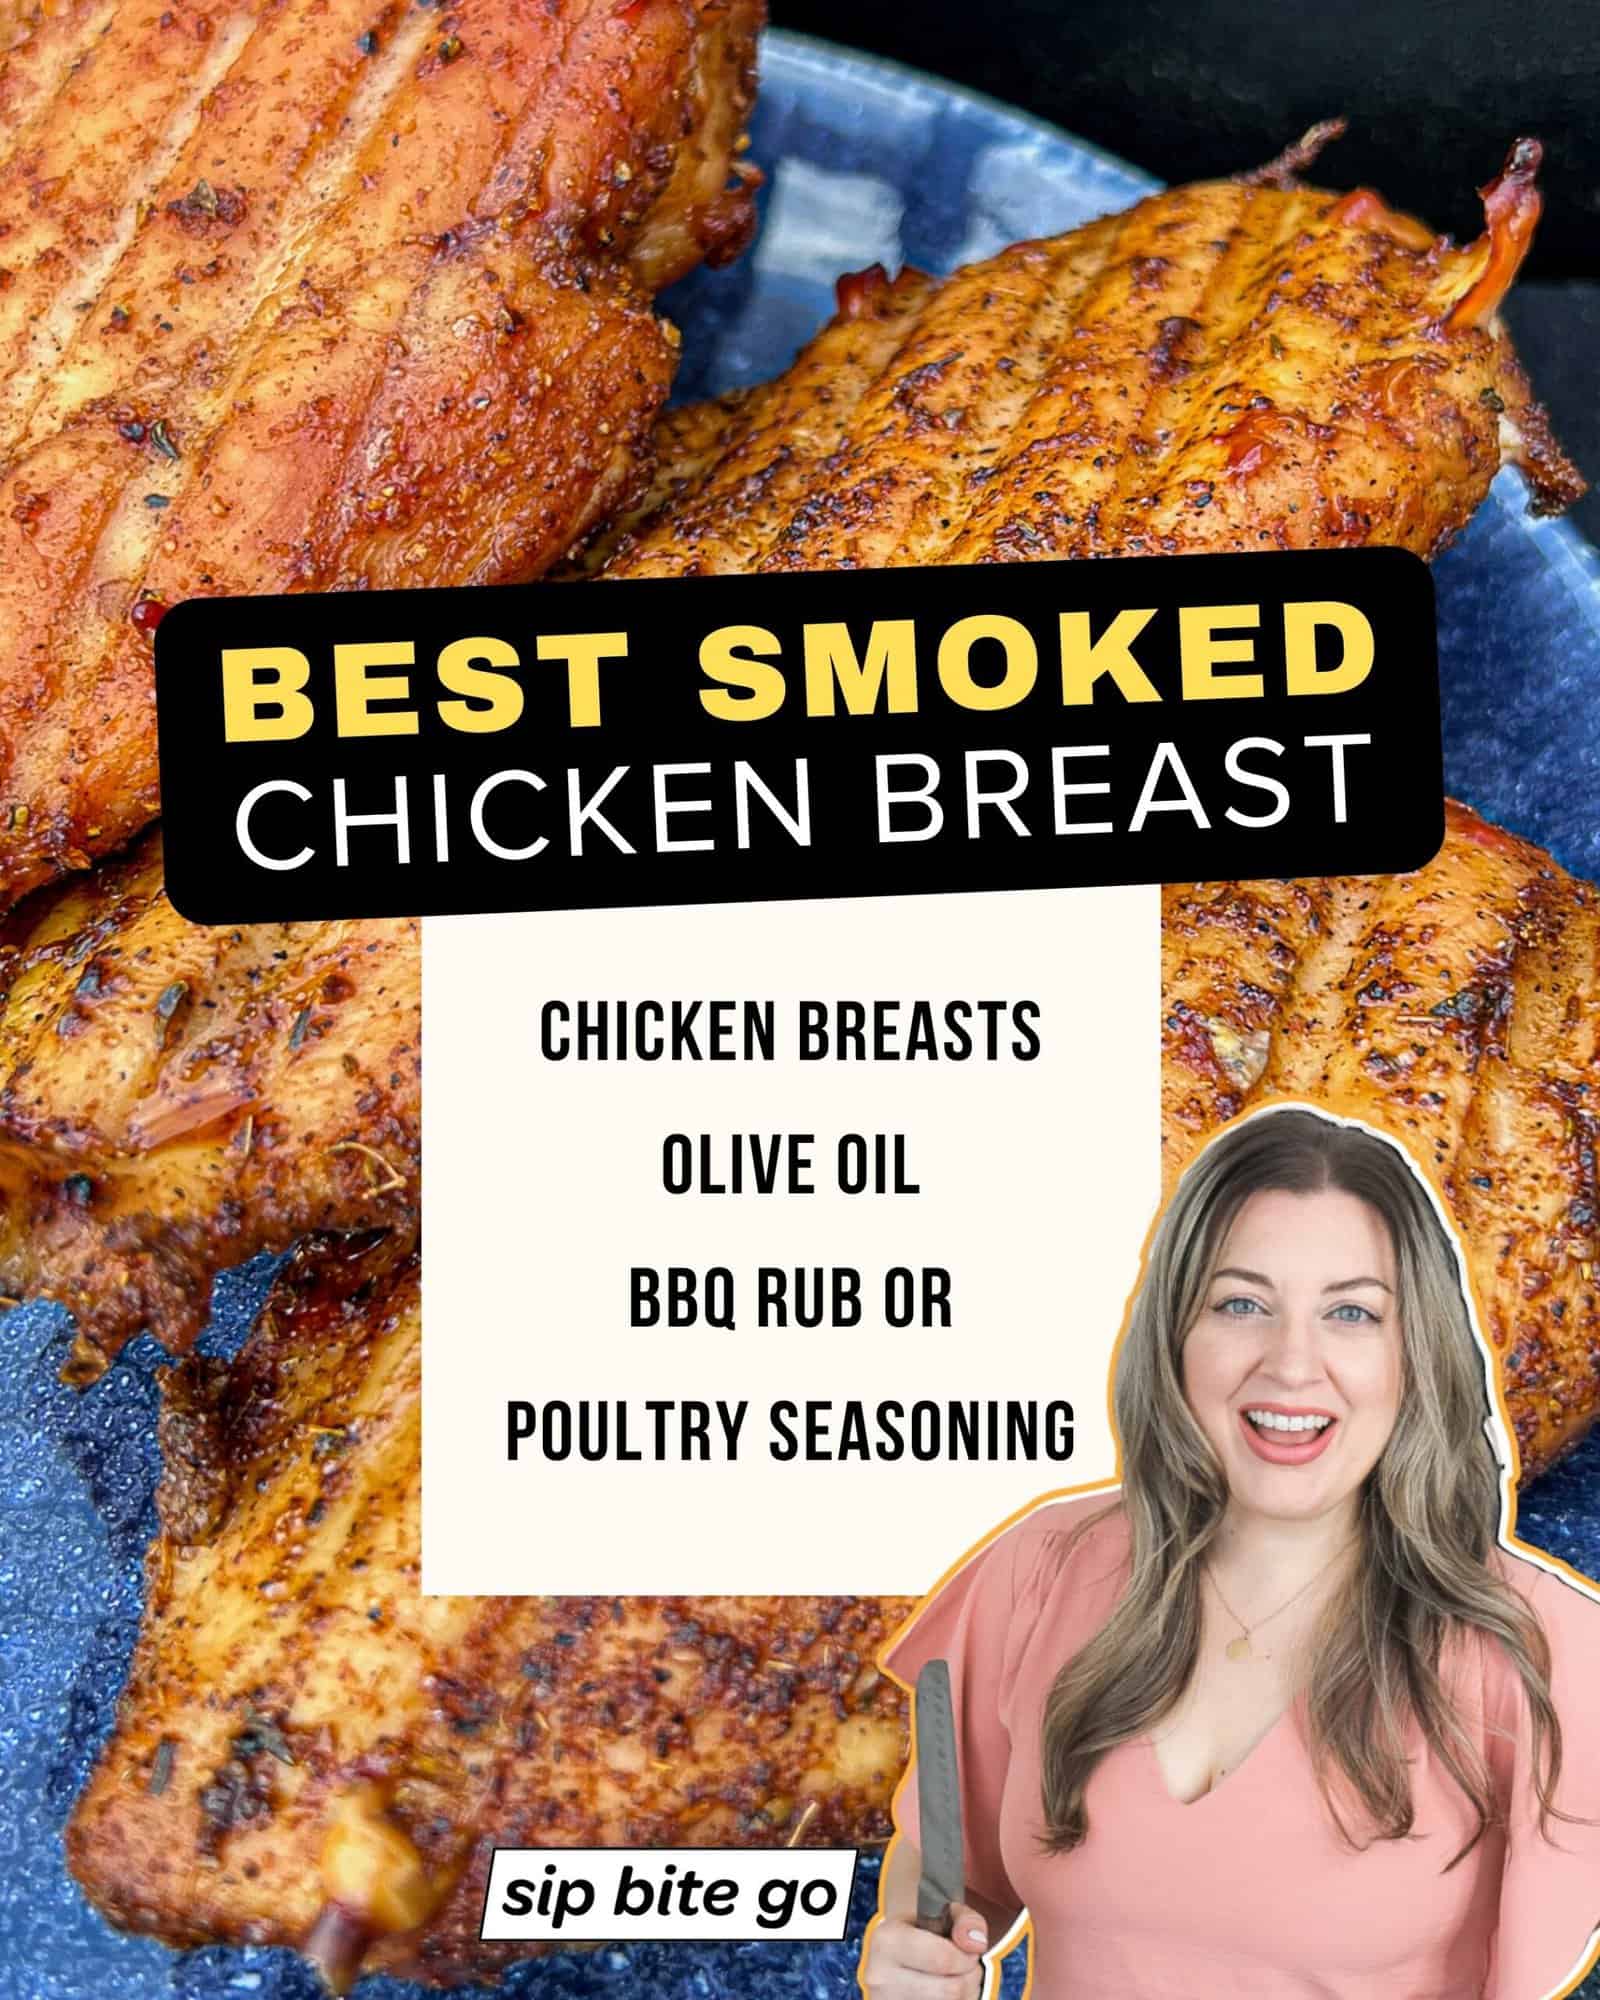 Infographic with smoked chicken breast recipe ingredients with recipe photo and text caption